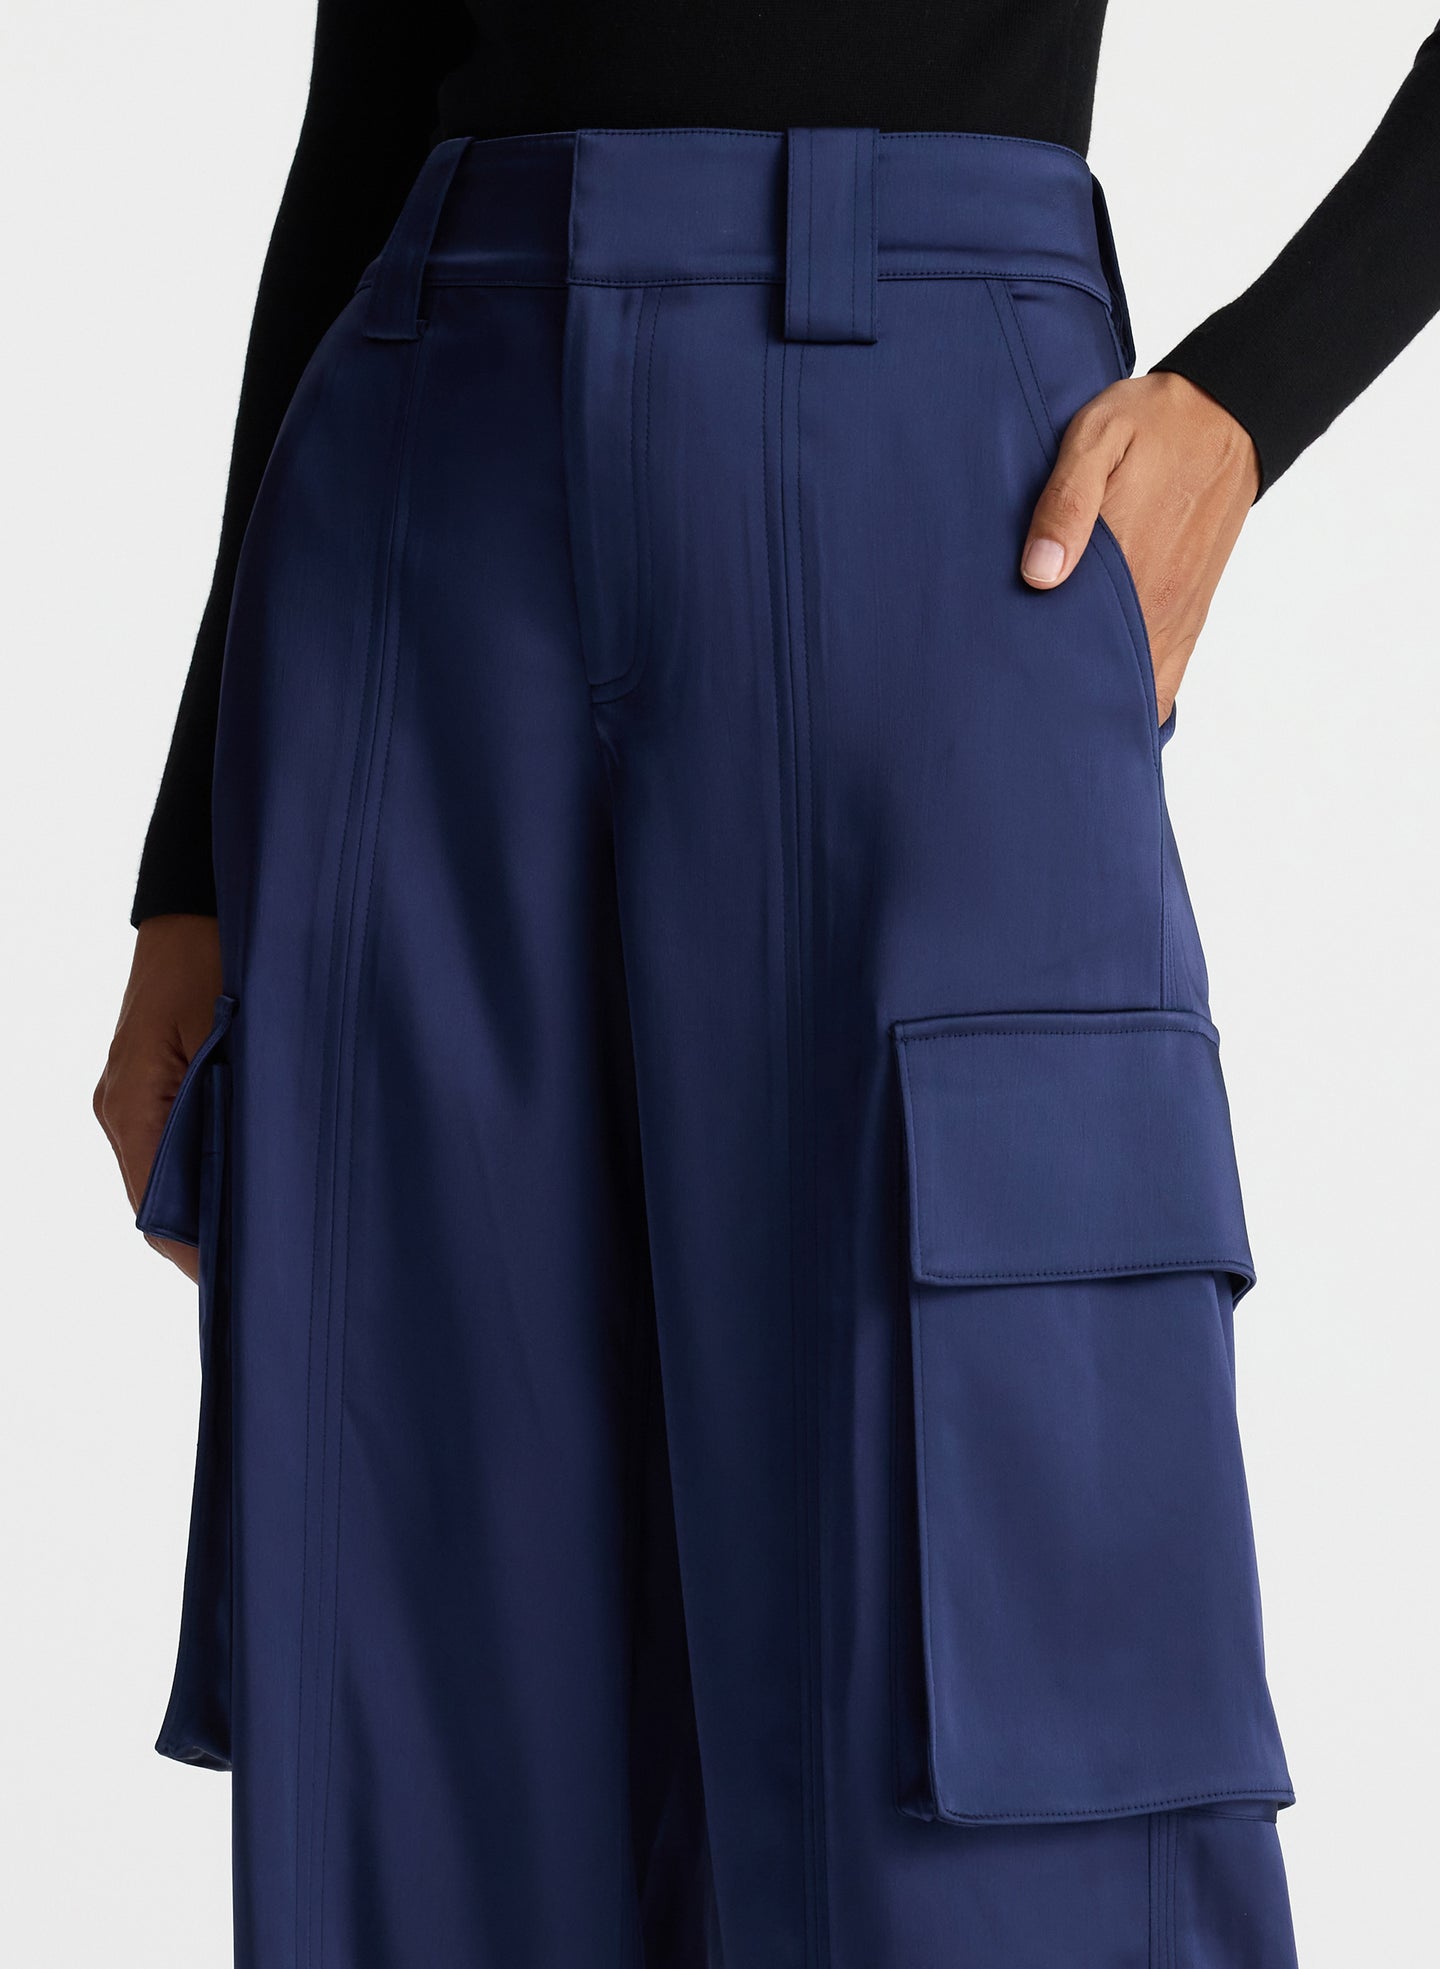 detail view of woman wearing black knit long sleeve top and blue satin cargo pants